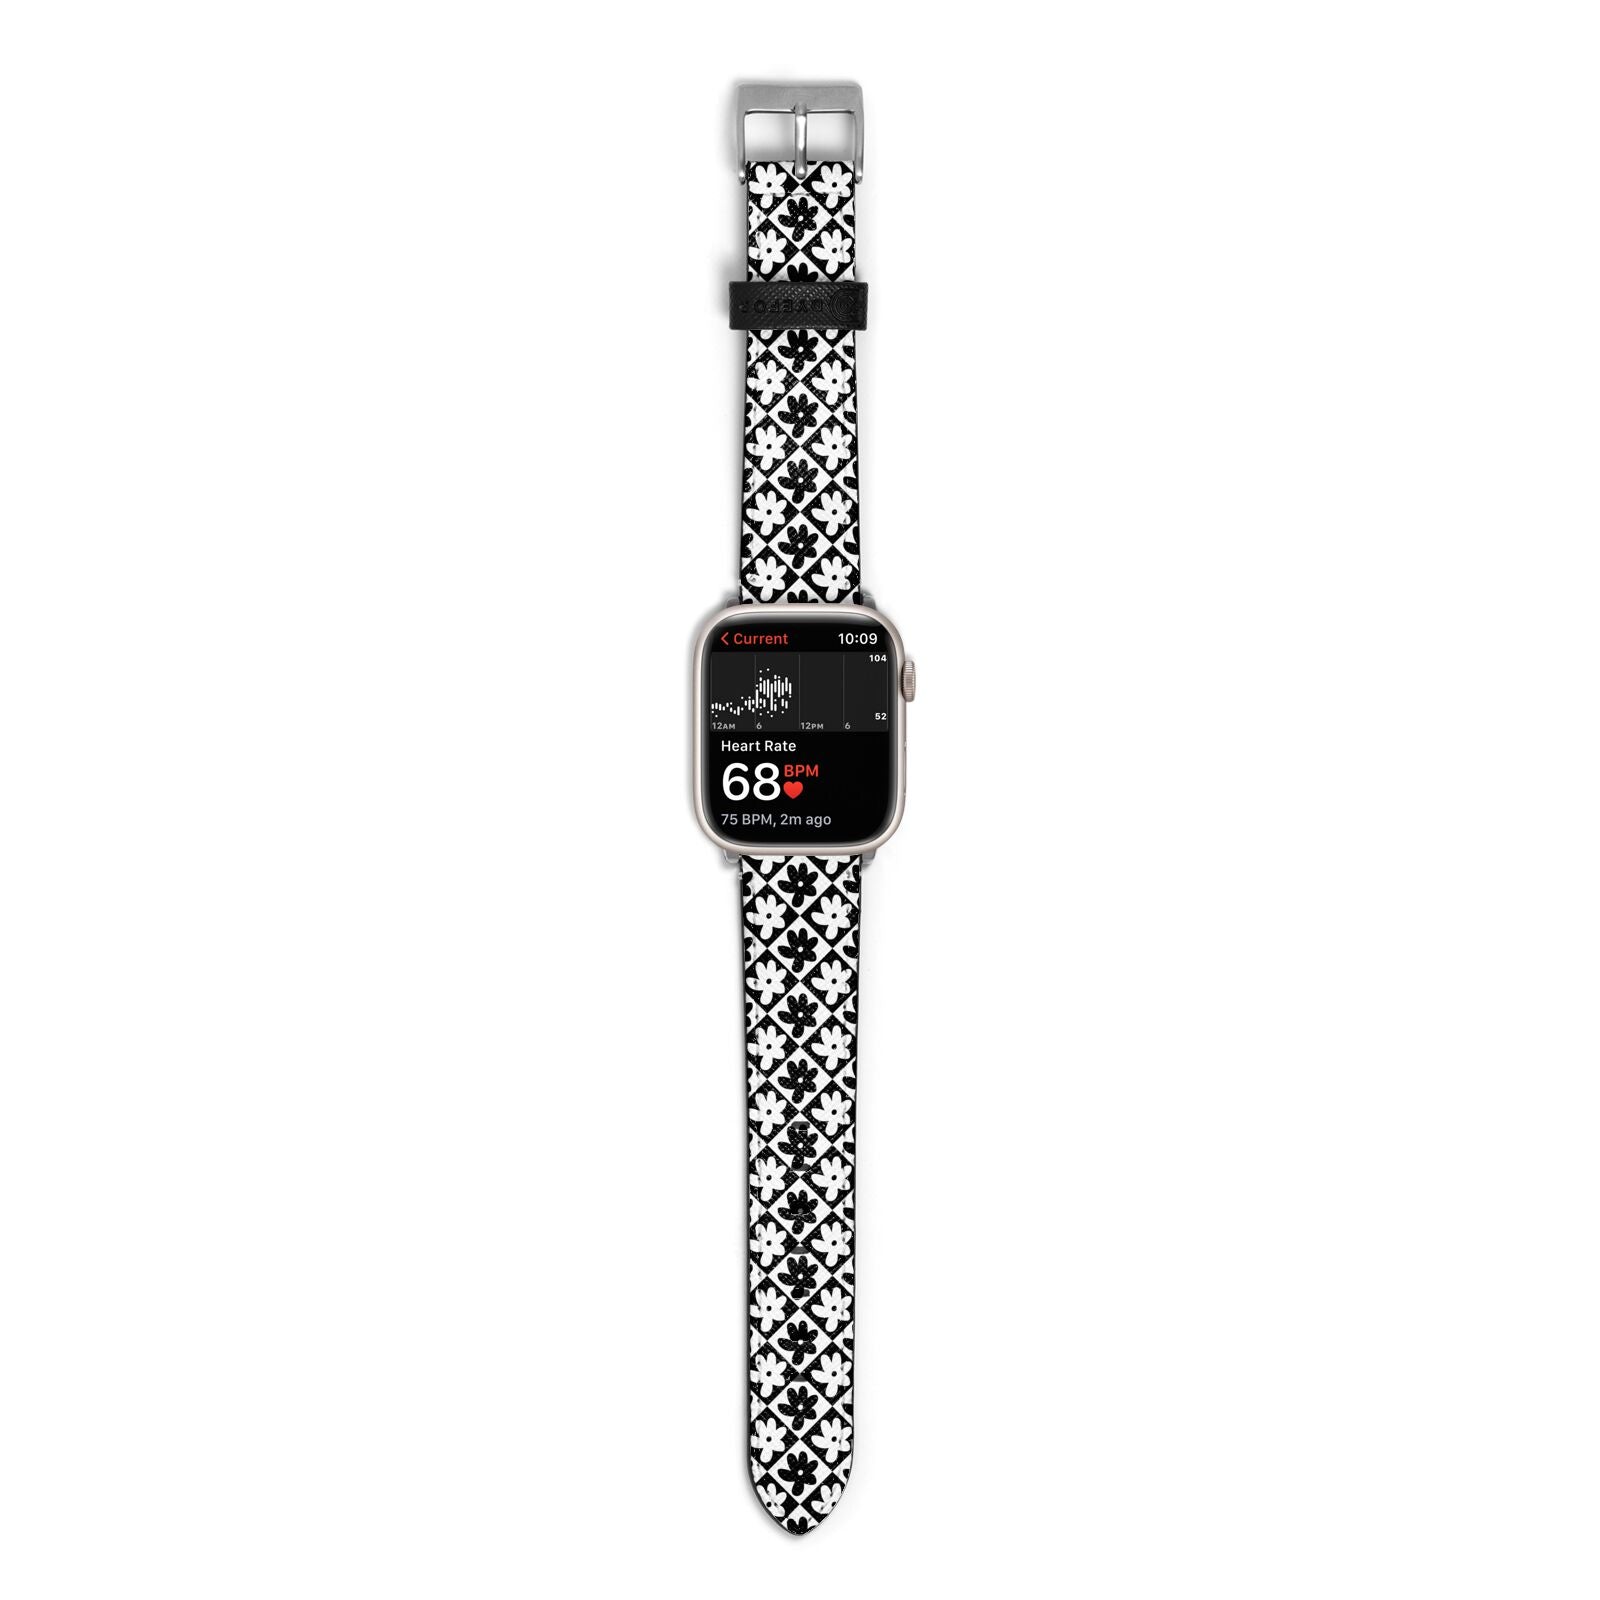 Check Flower Apple Watch Strap Size 38mm with Silver Hardware